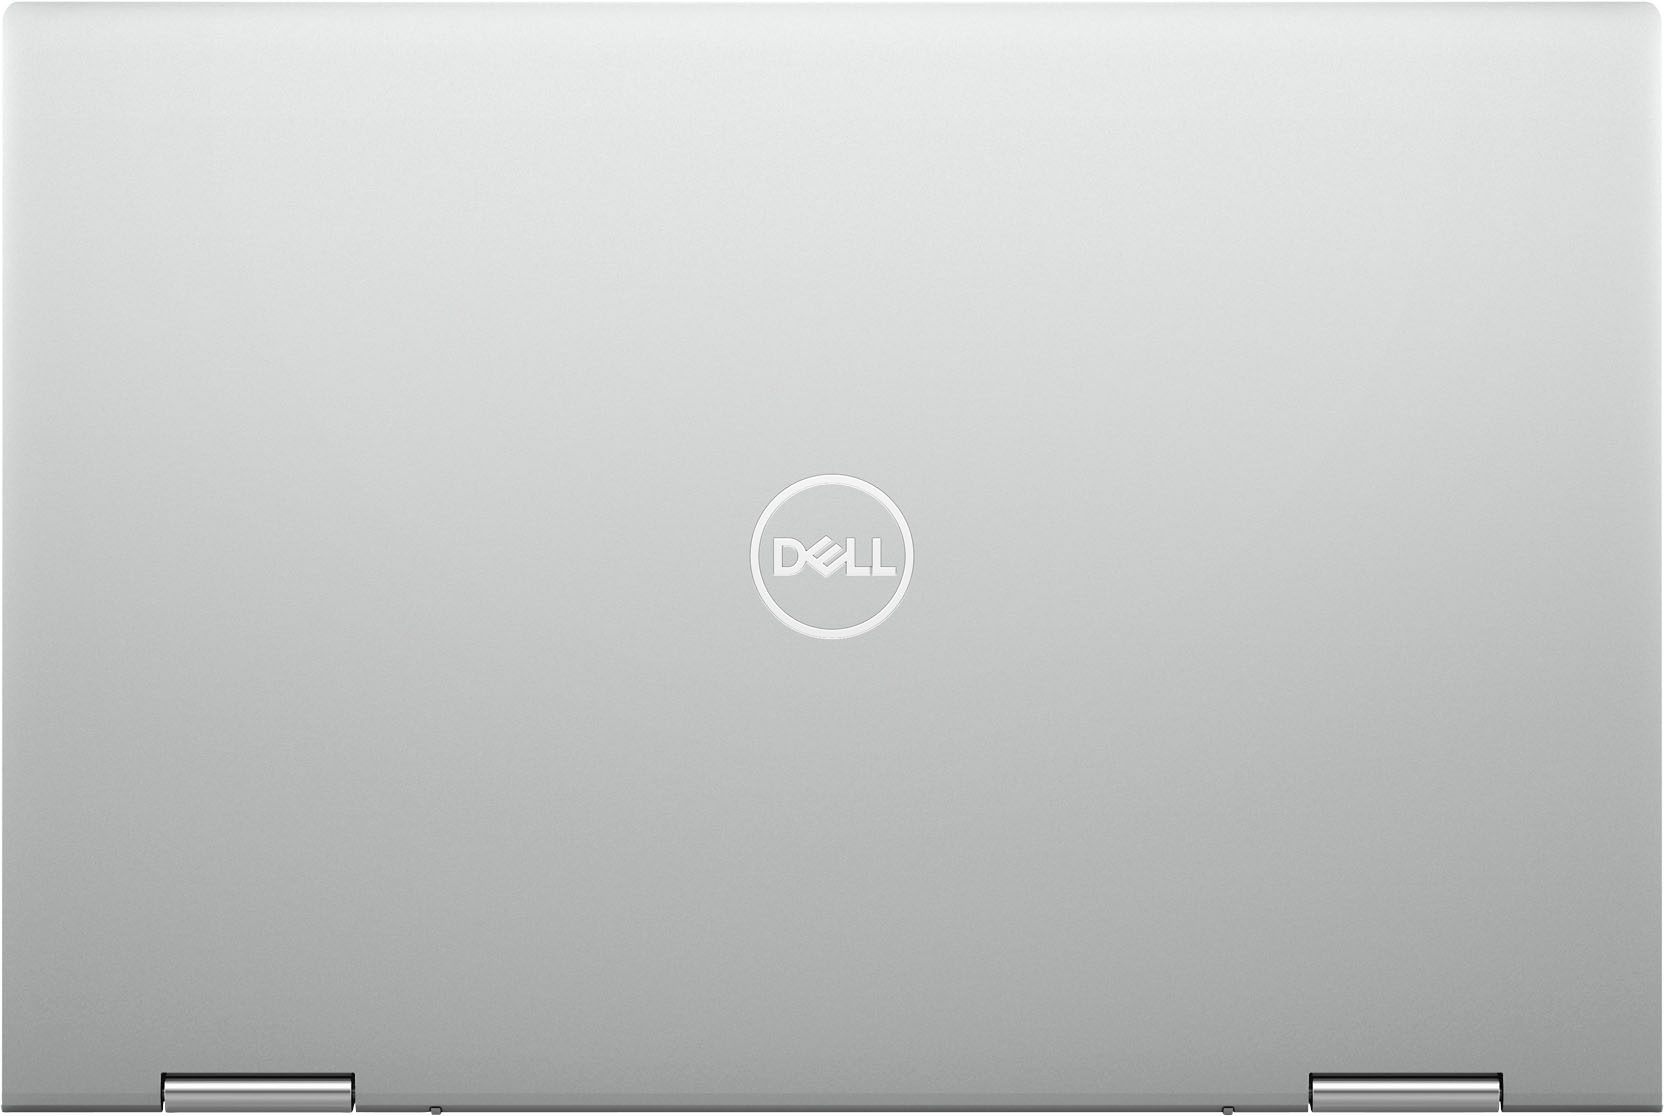 Dell Inspiron 7506 2-in-1 15.6" FHD Touch Laptop, Intel Core i5 1135G7, 16G 